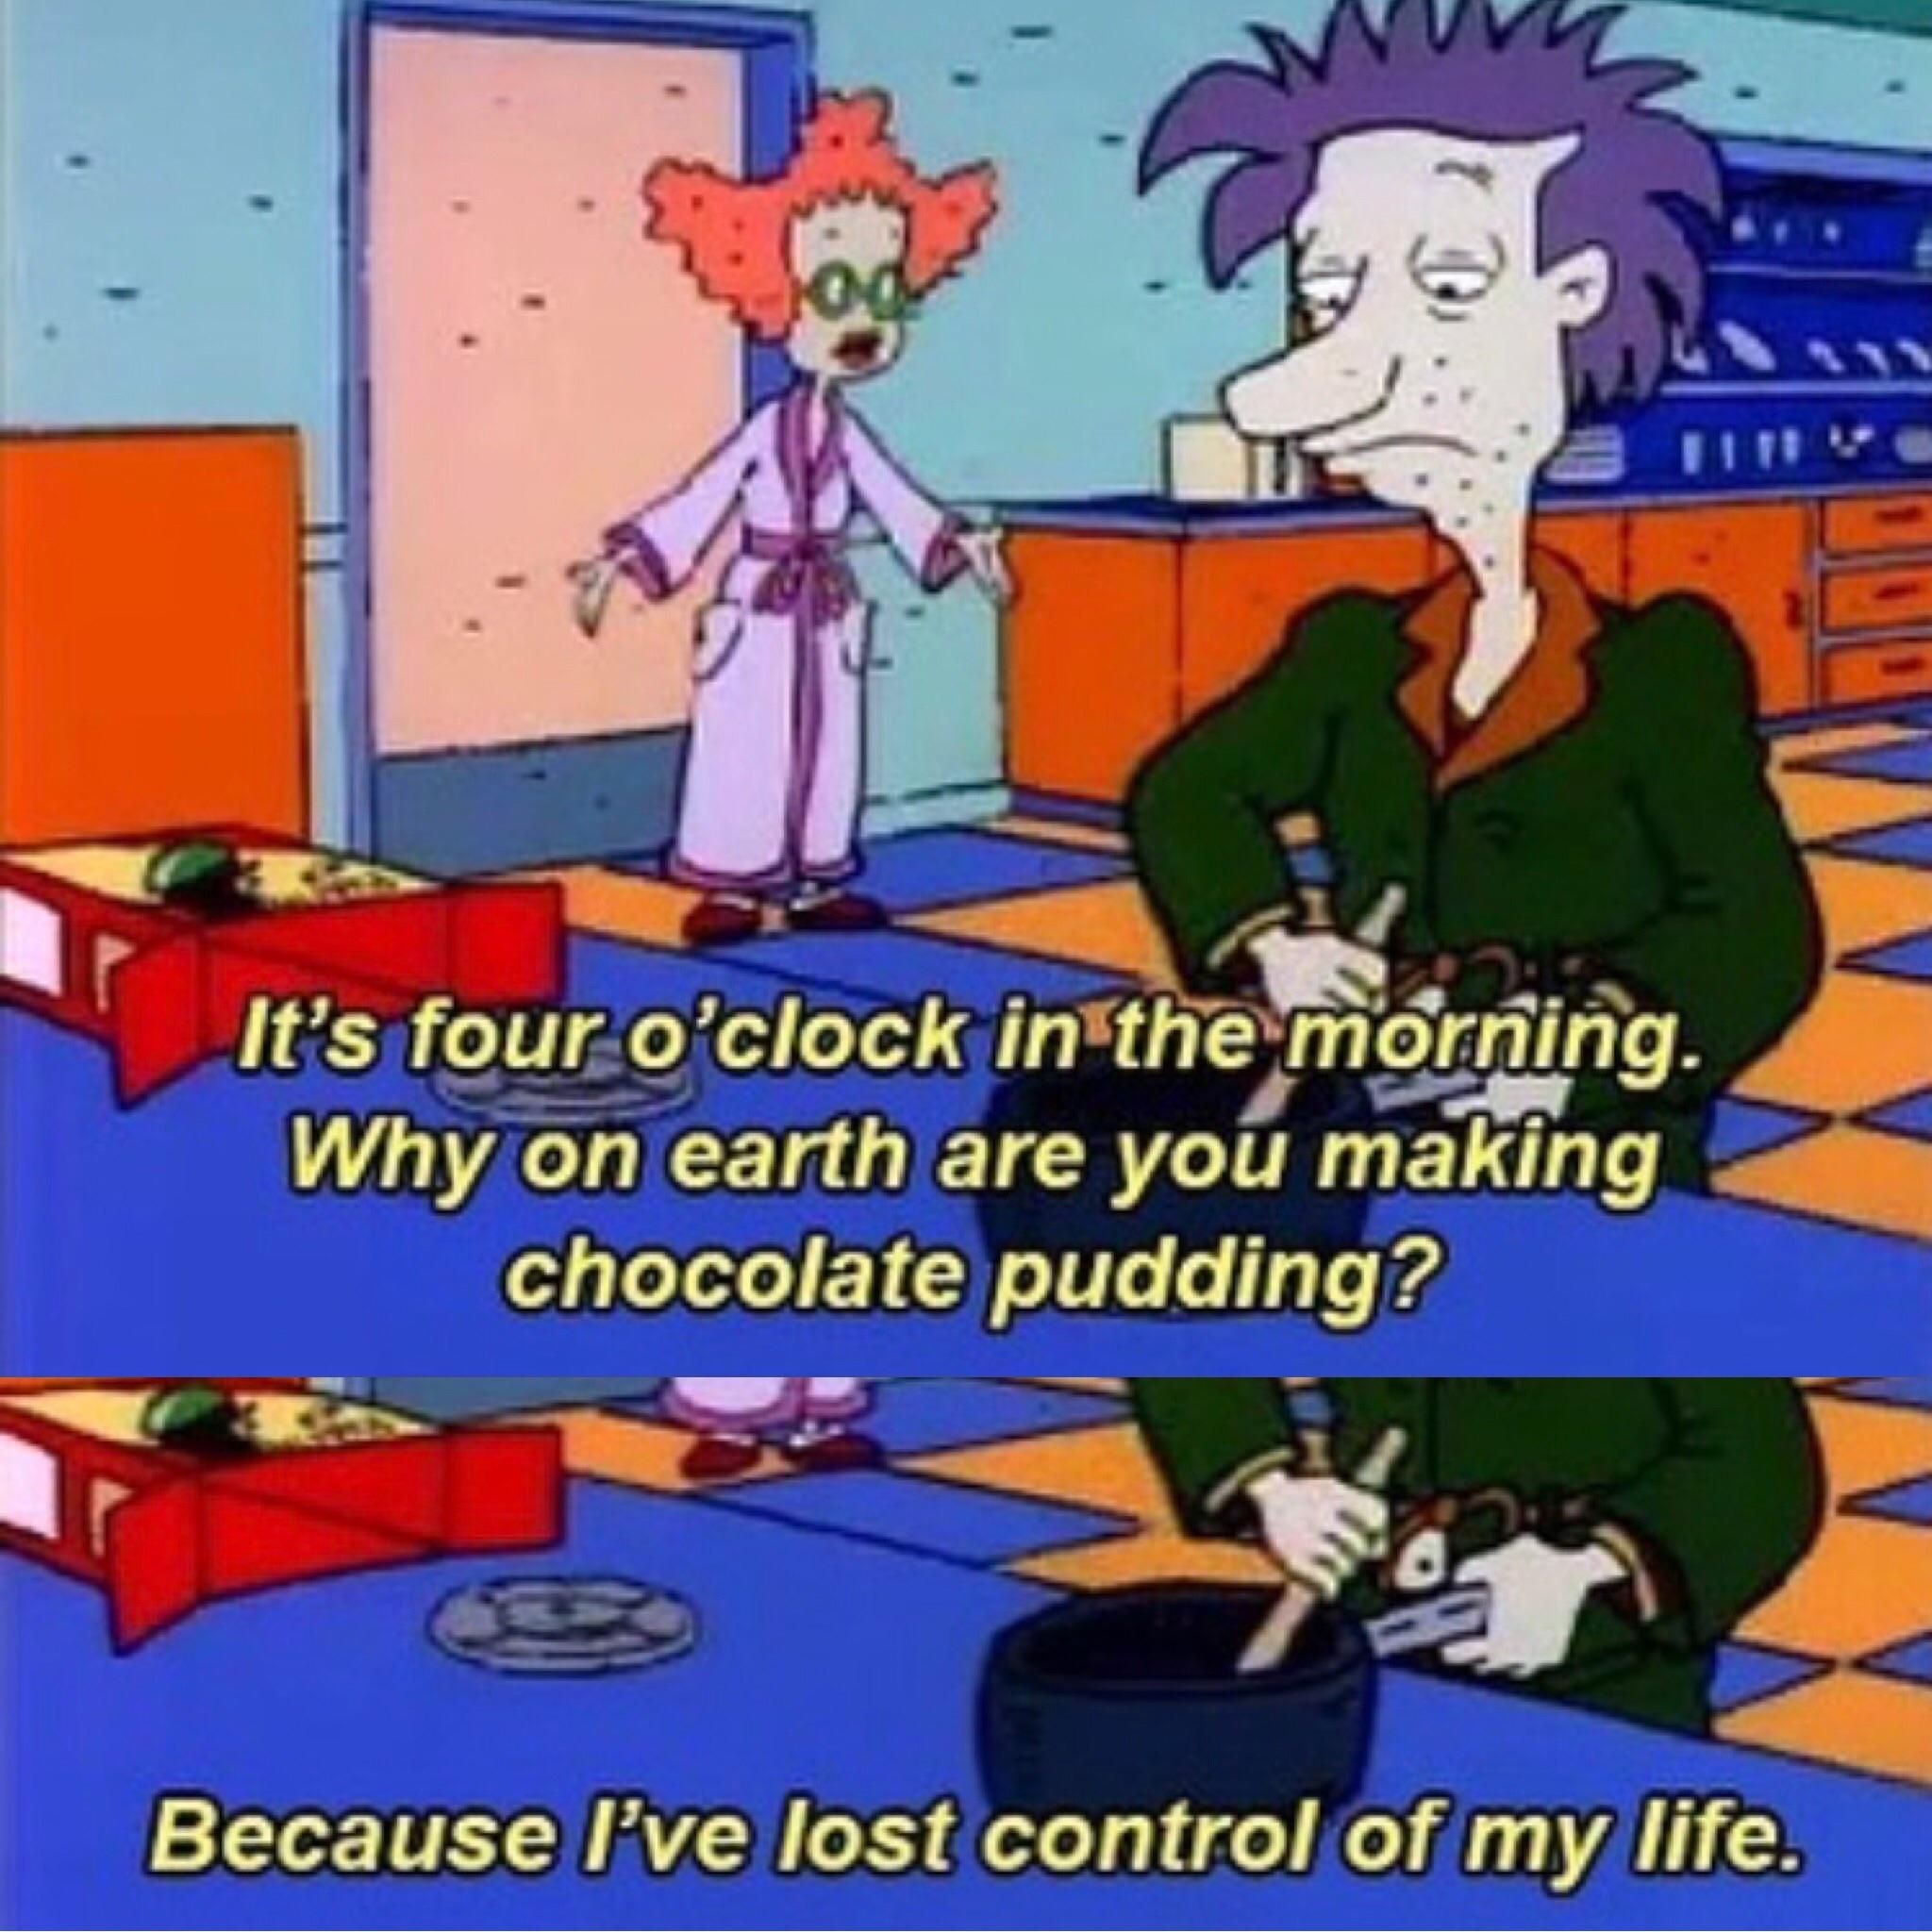 Rugrats with the subliminal dark humour.